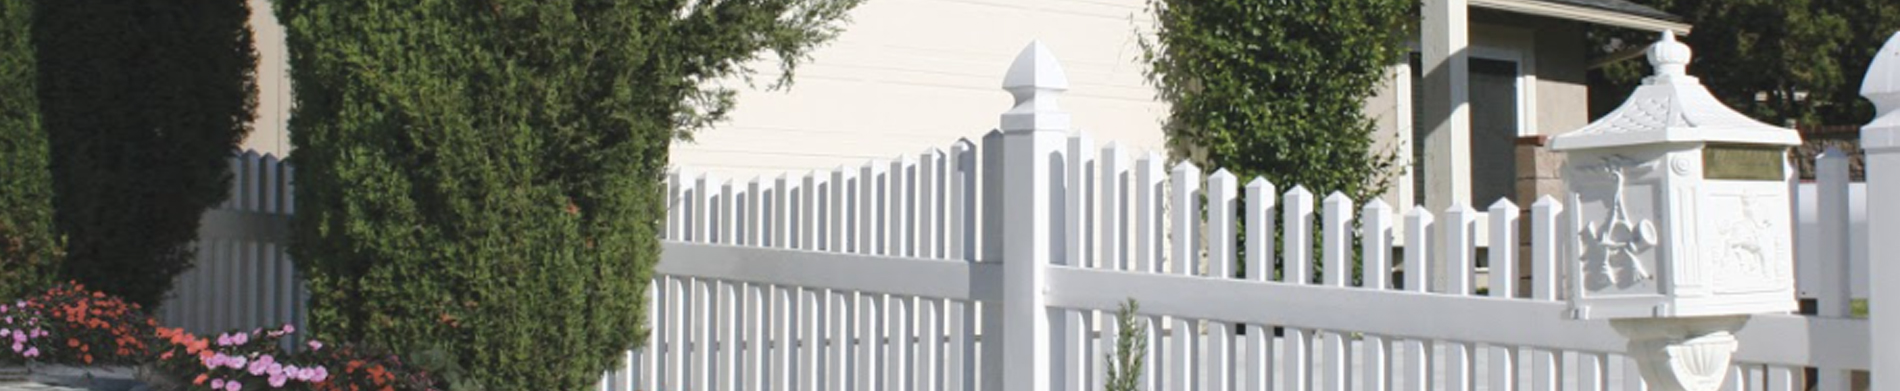 Guide to Customizing Vinyl Fences – Here are a few tips from the experts at Duramax!